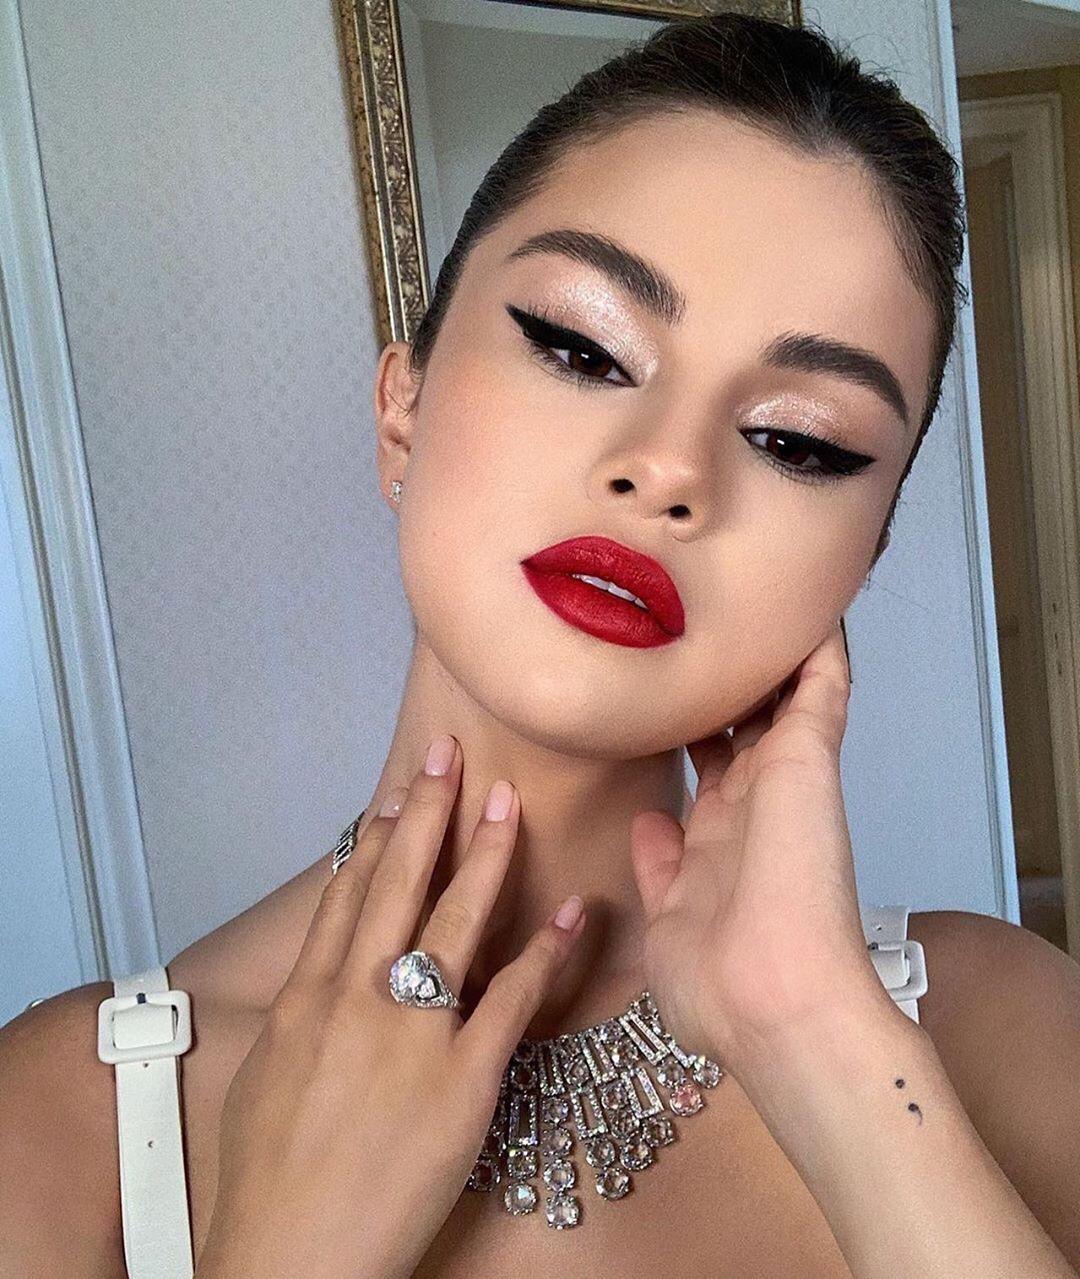 Selena Gomez likes to keep it off social media, here's why!